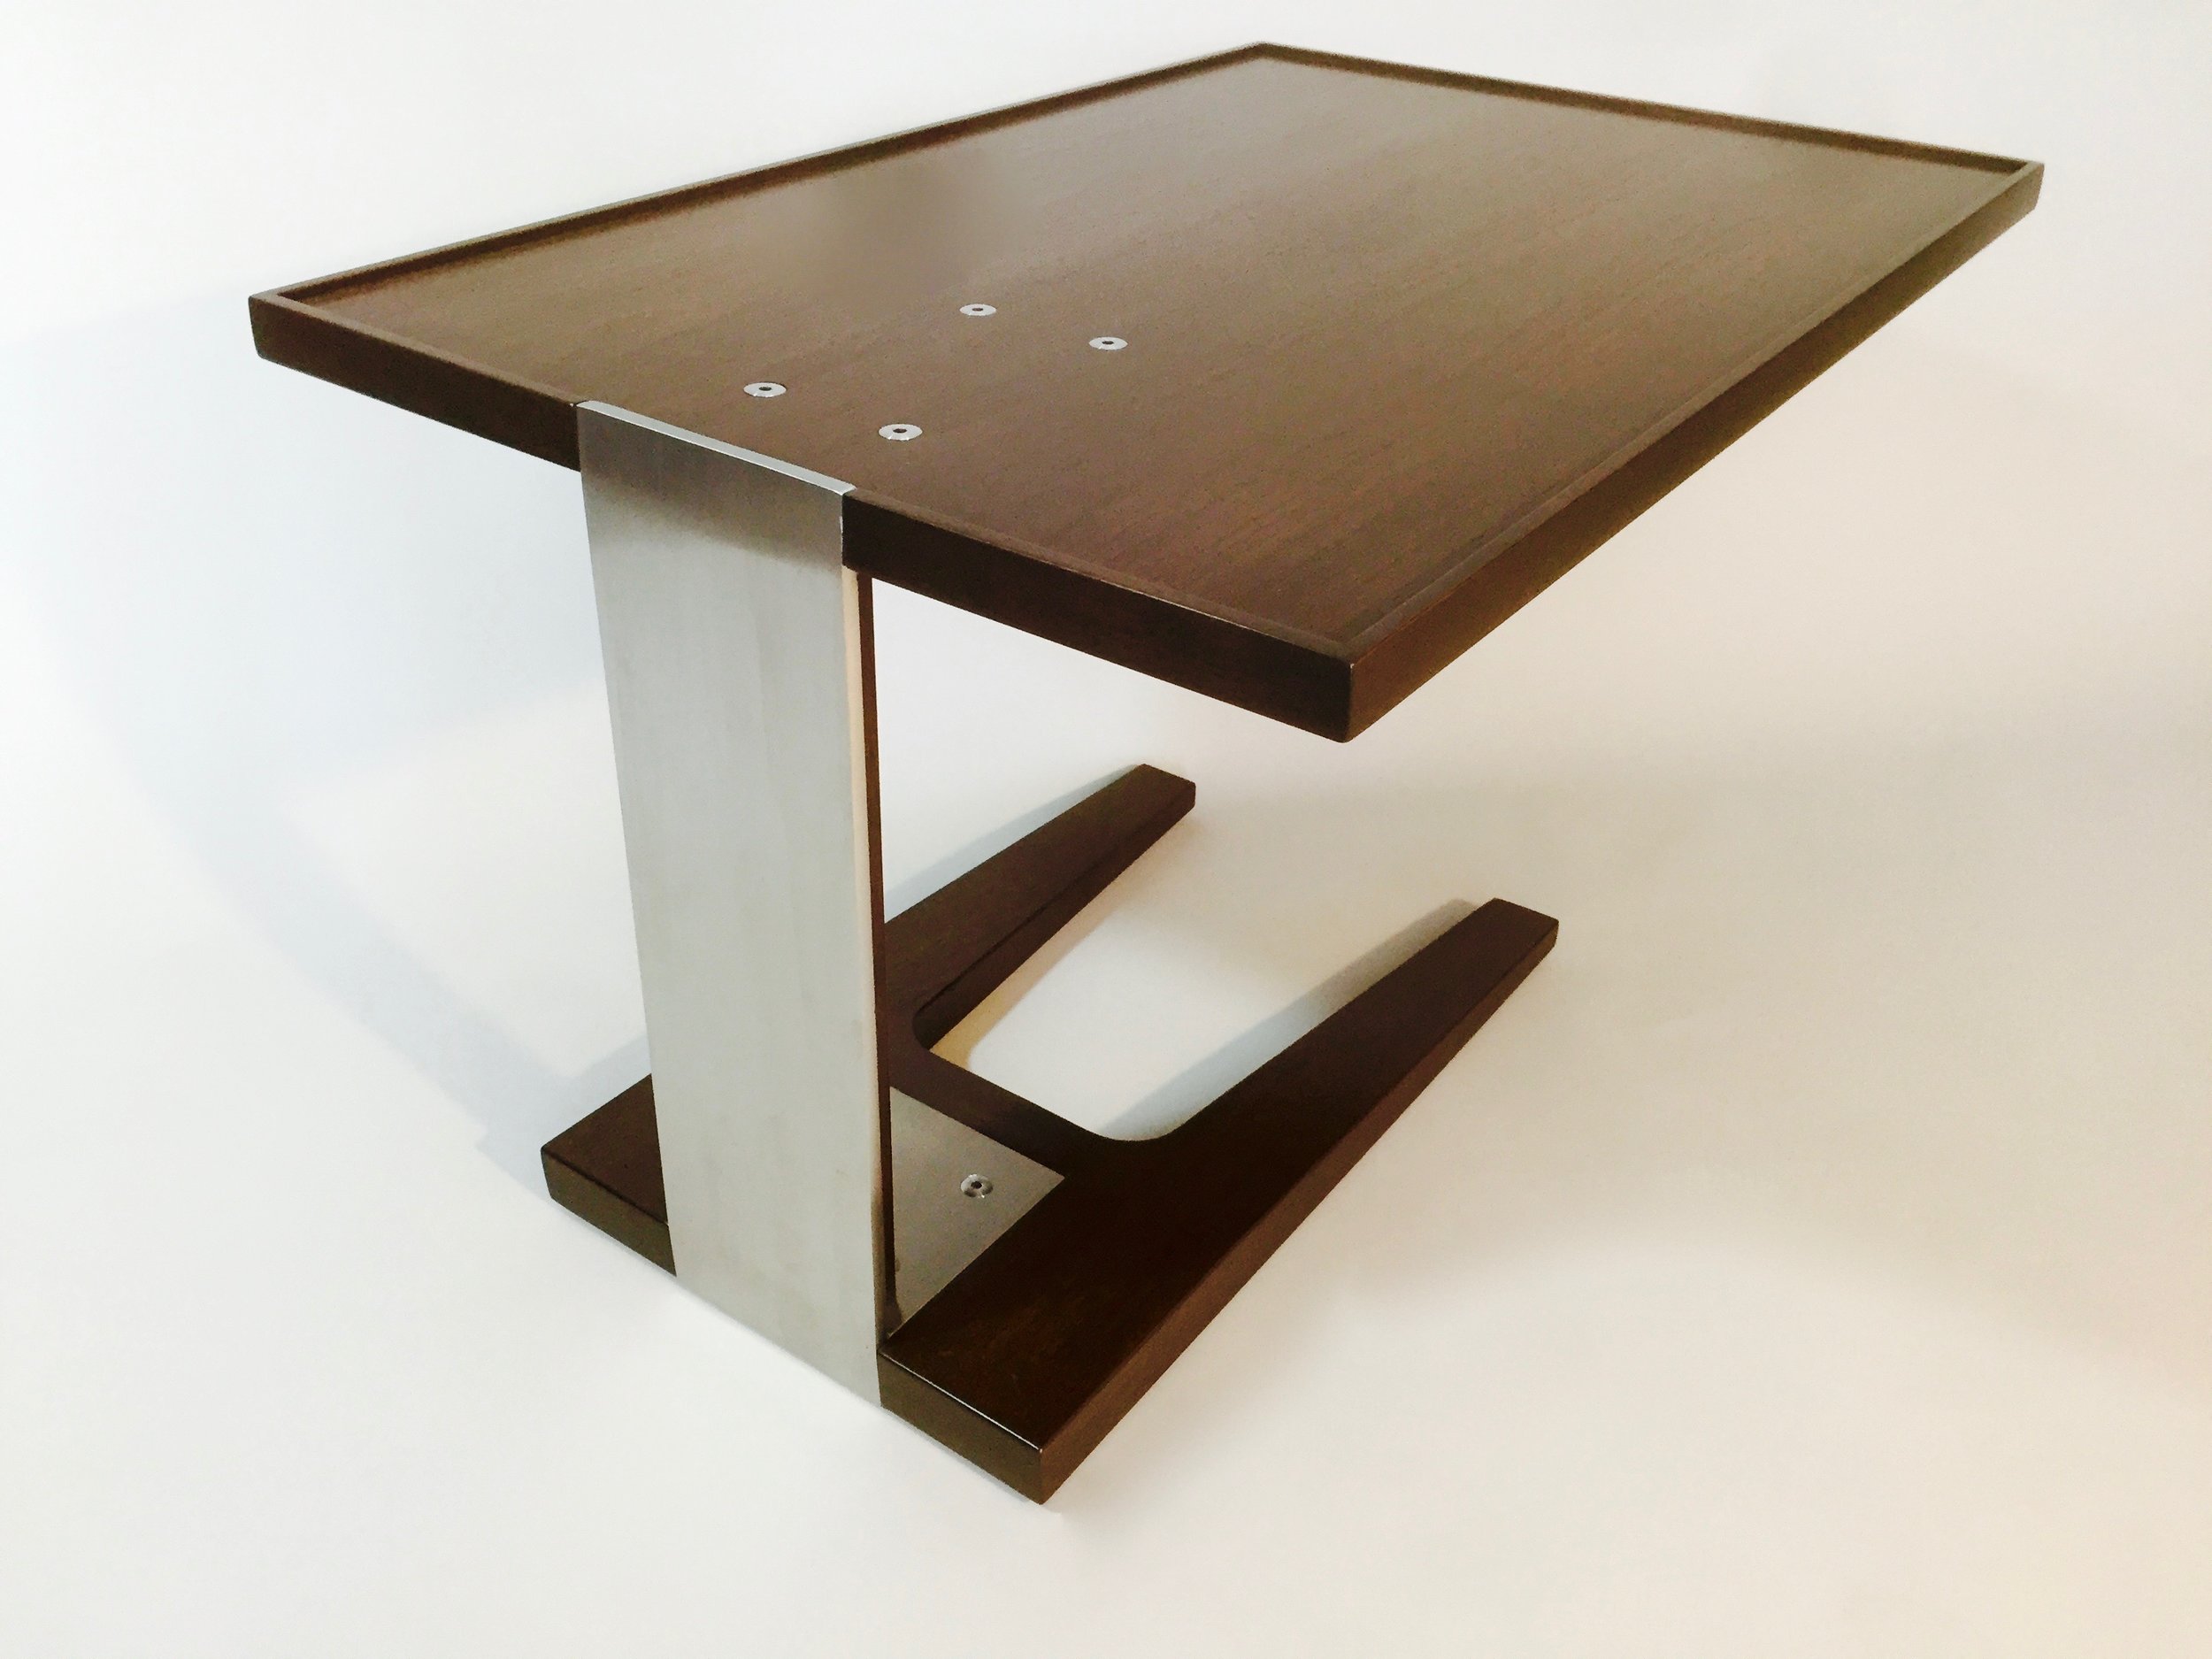  Sofa / Slide under table  Walnut and Stainless Steel  20" x 30" x 21"h 